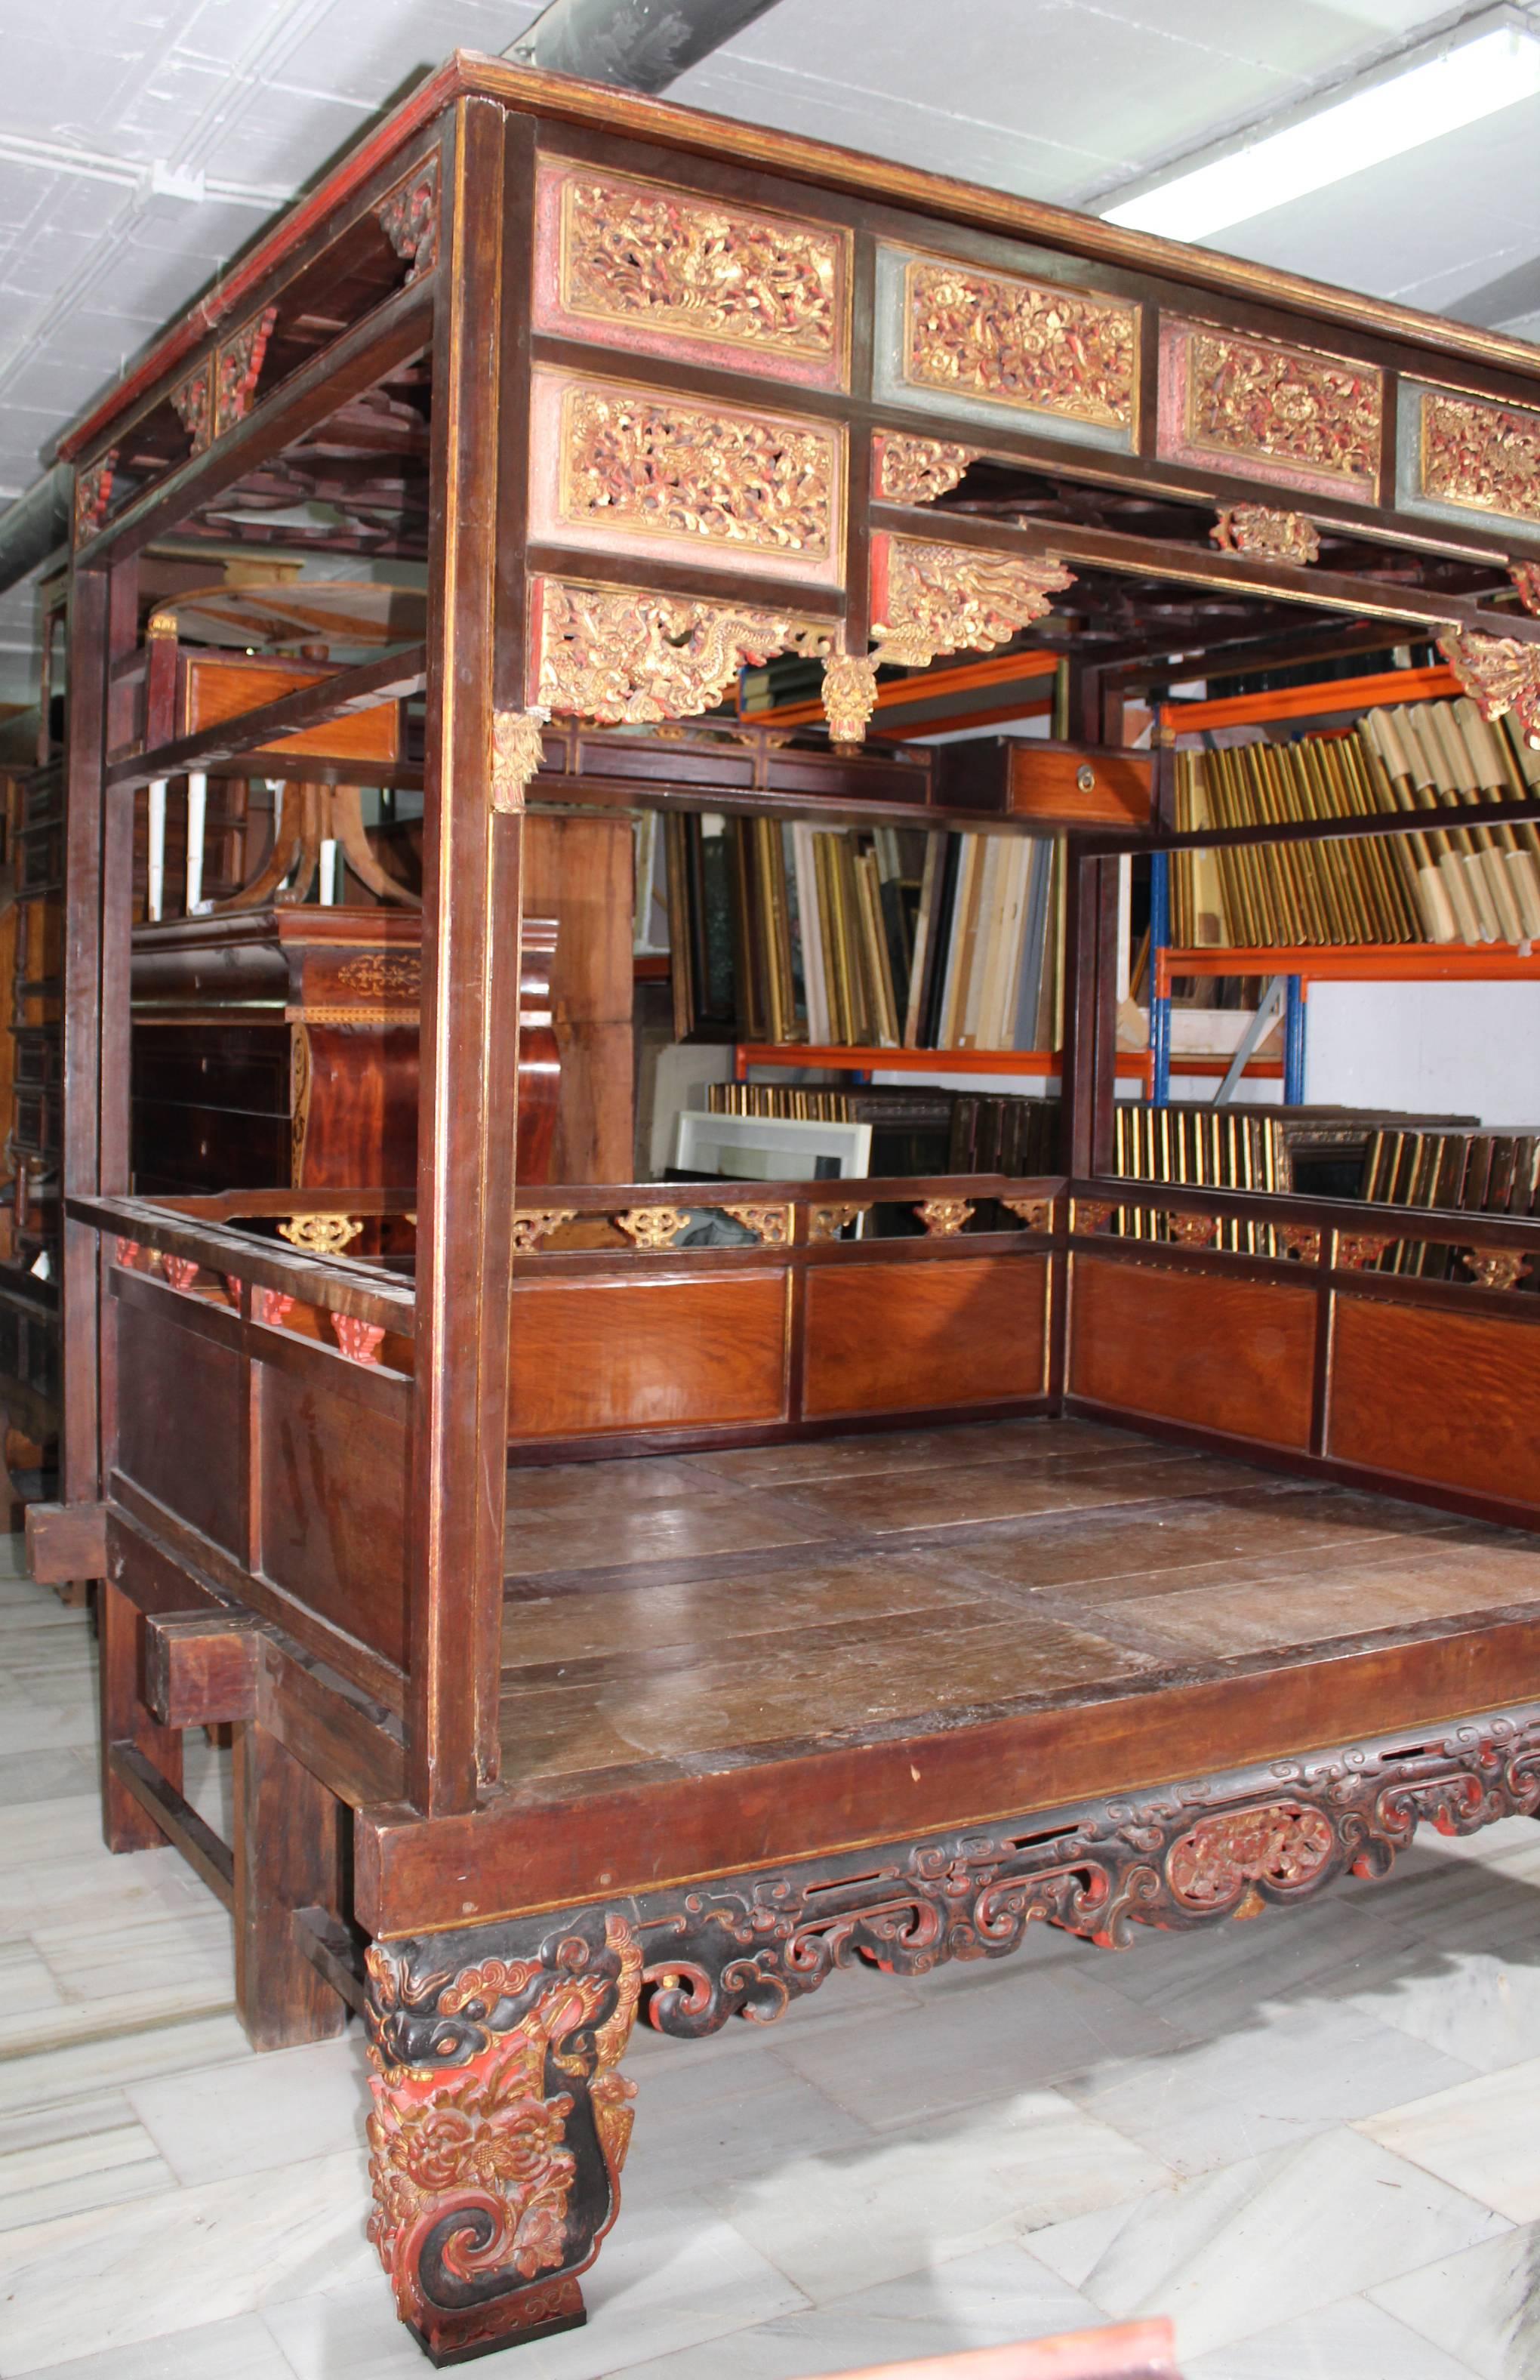 This is a wonderful example of a canopy bed from Shanghai Province, China. Made of Chinese Northern Elm, this bed features hoofed feet and multiple floral carvings. 

The exterior is heavily decorated with gold leafing, carvings, ornate carved